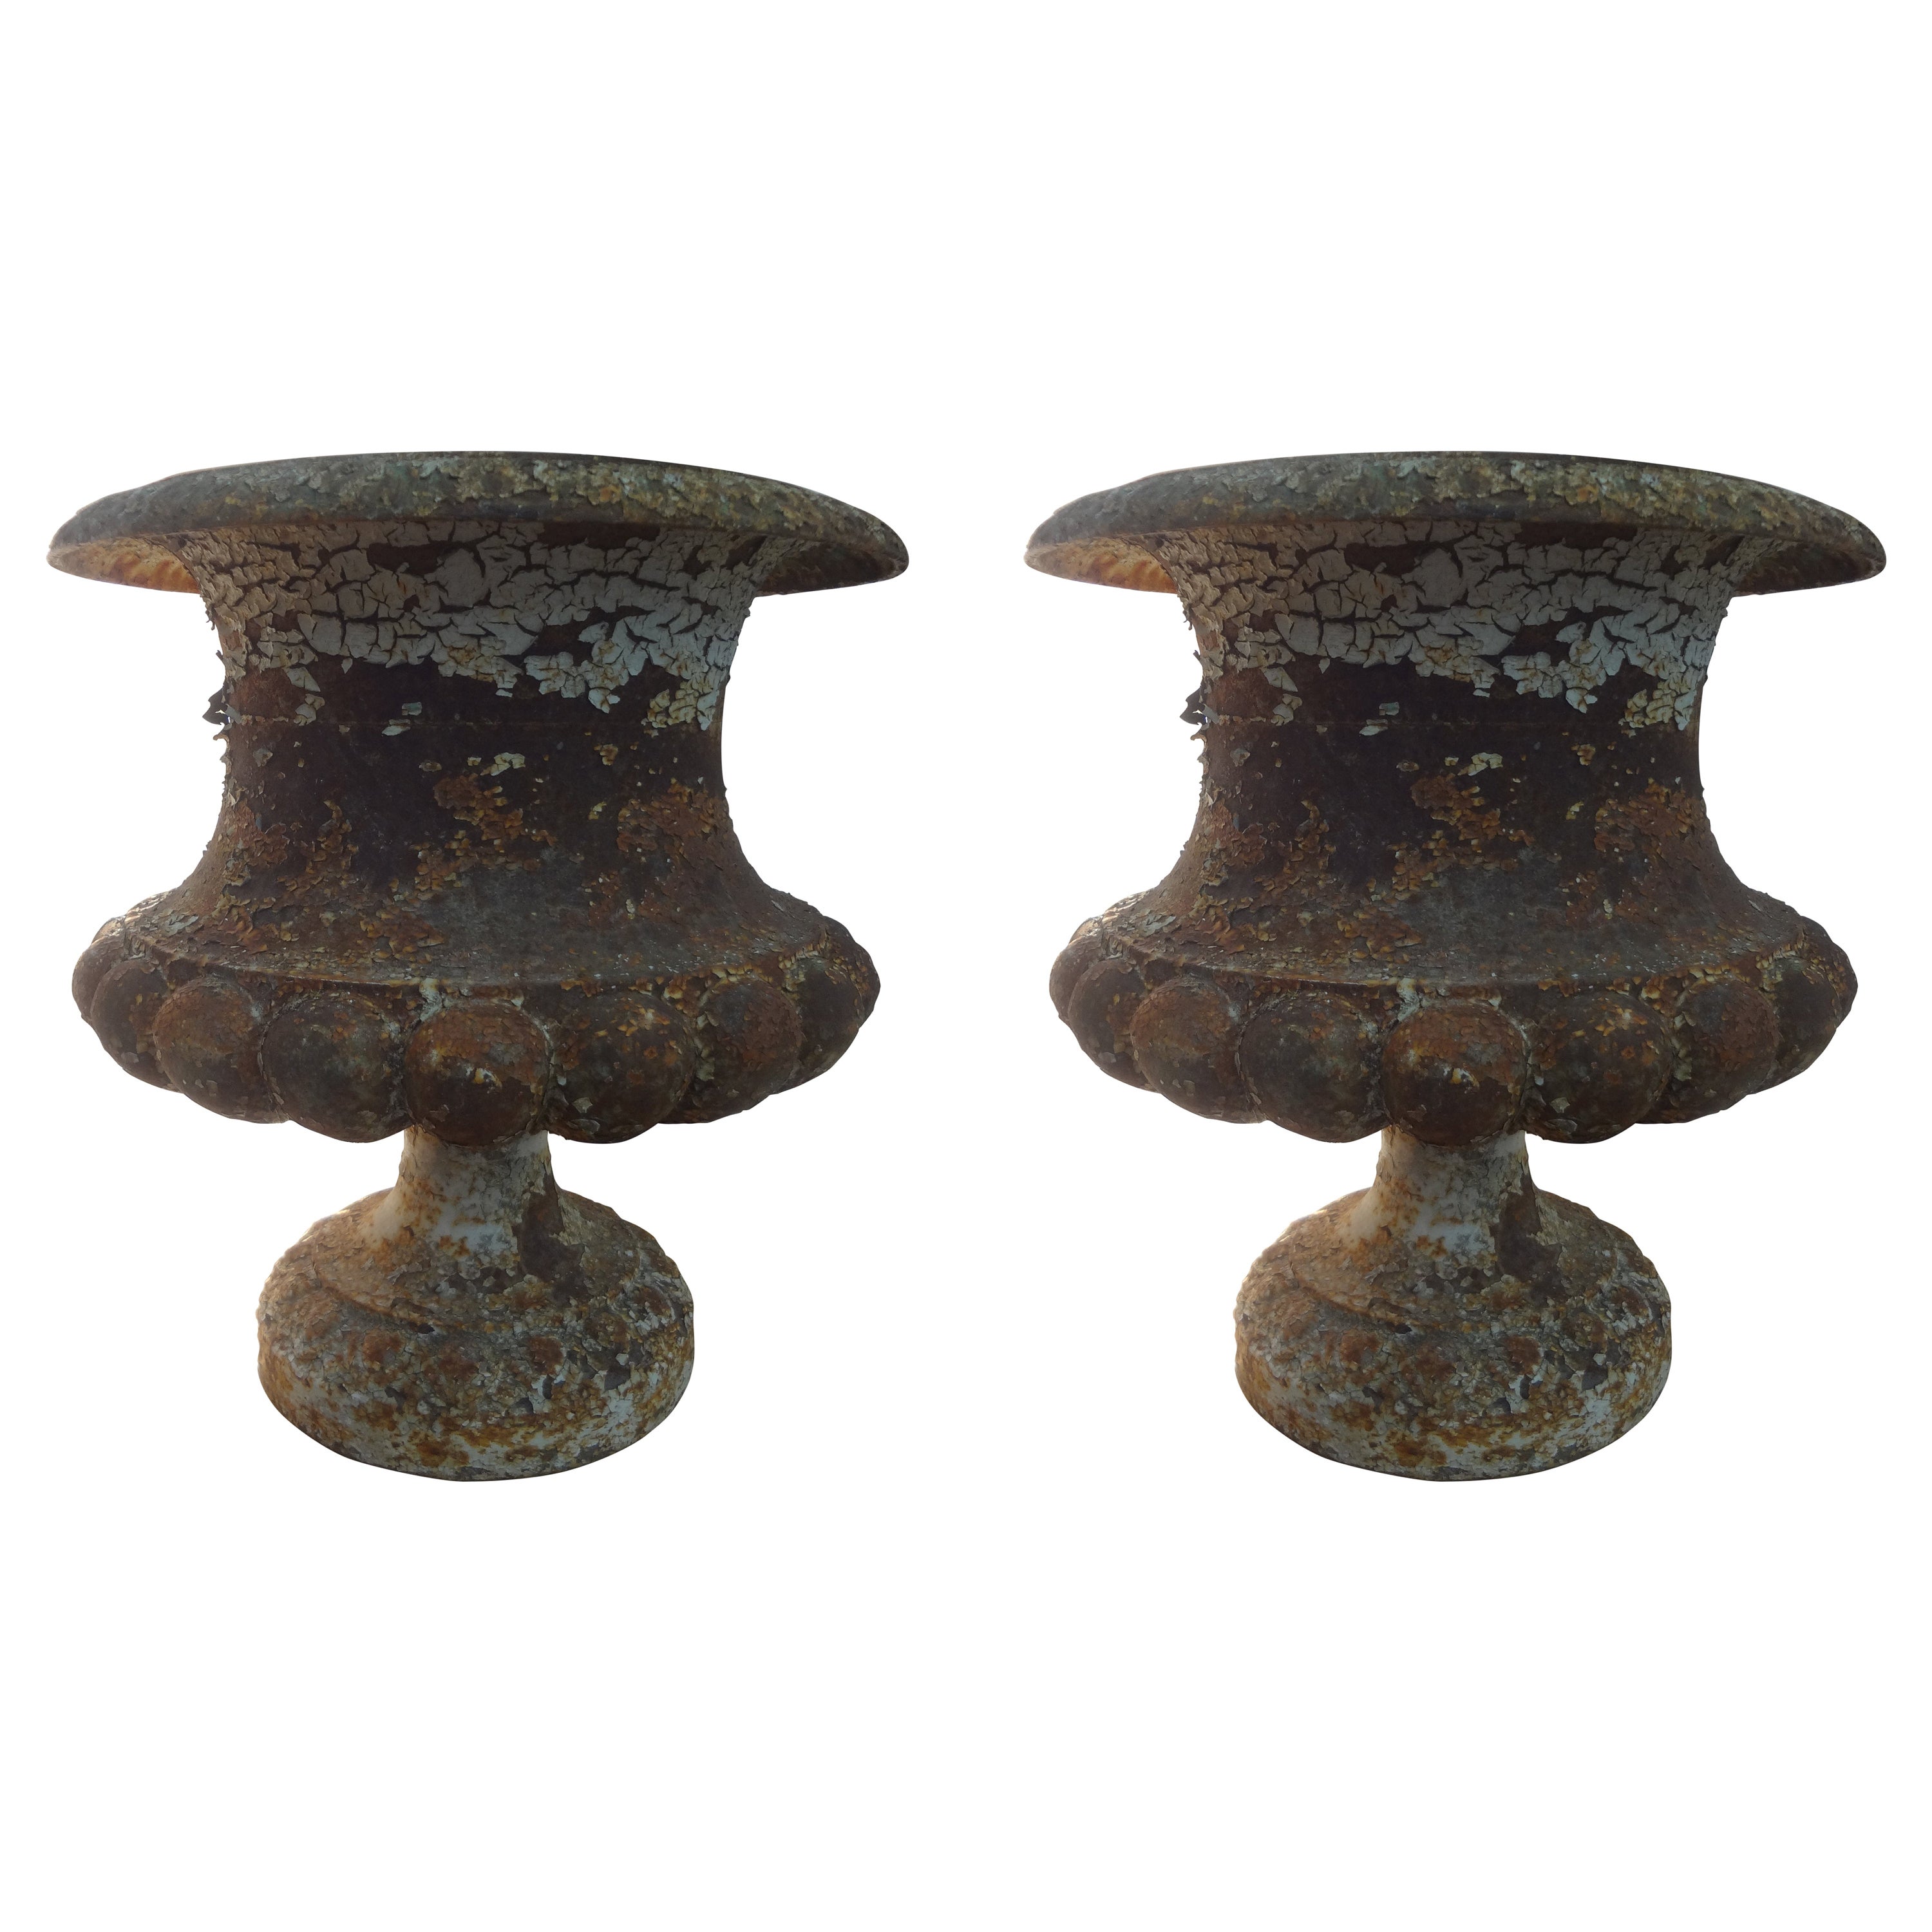 Pair Of 19th Century French Iron Garden Urns For Sale